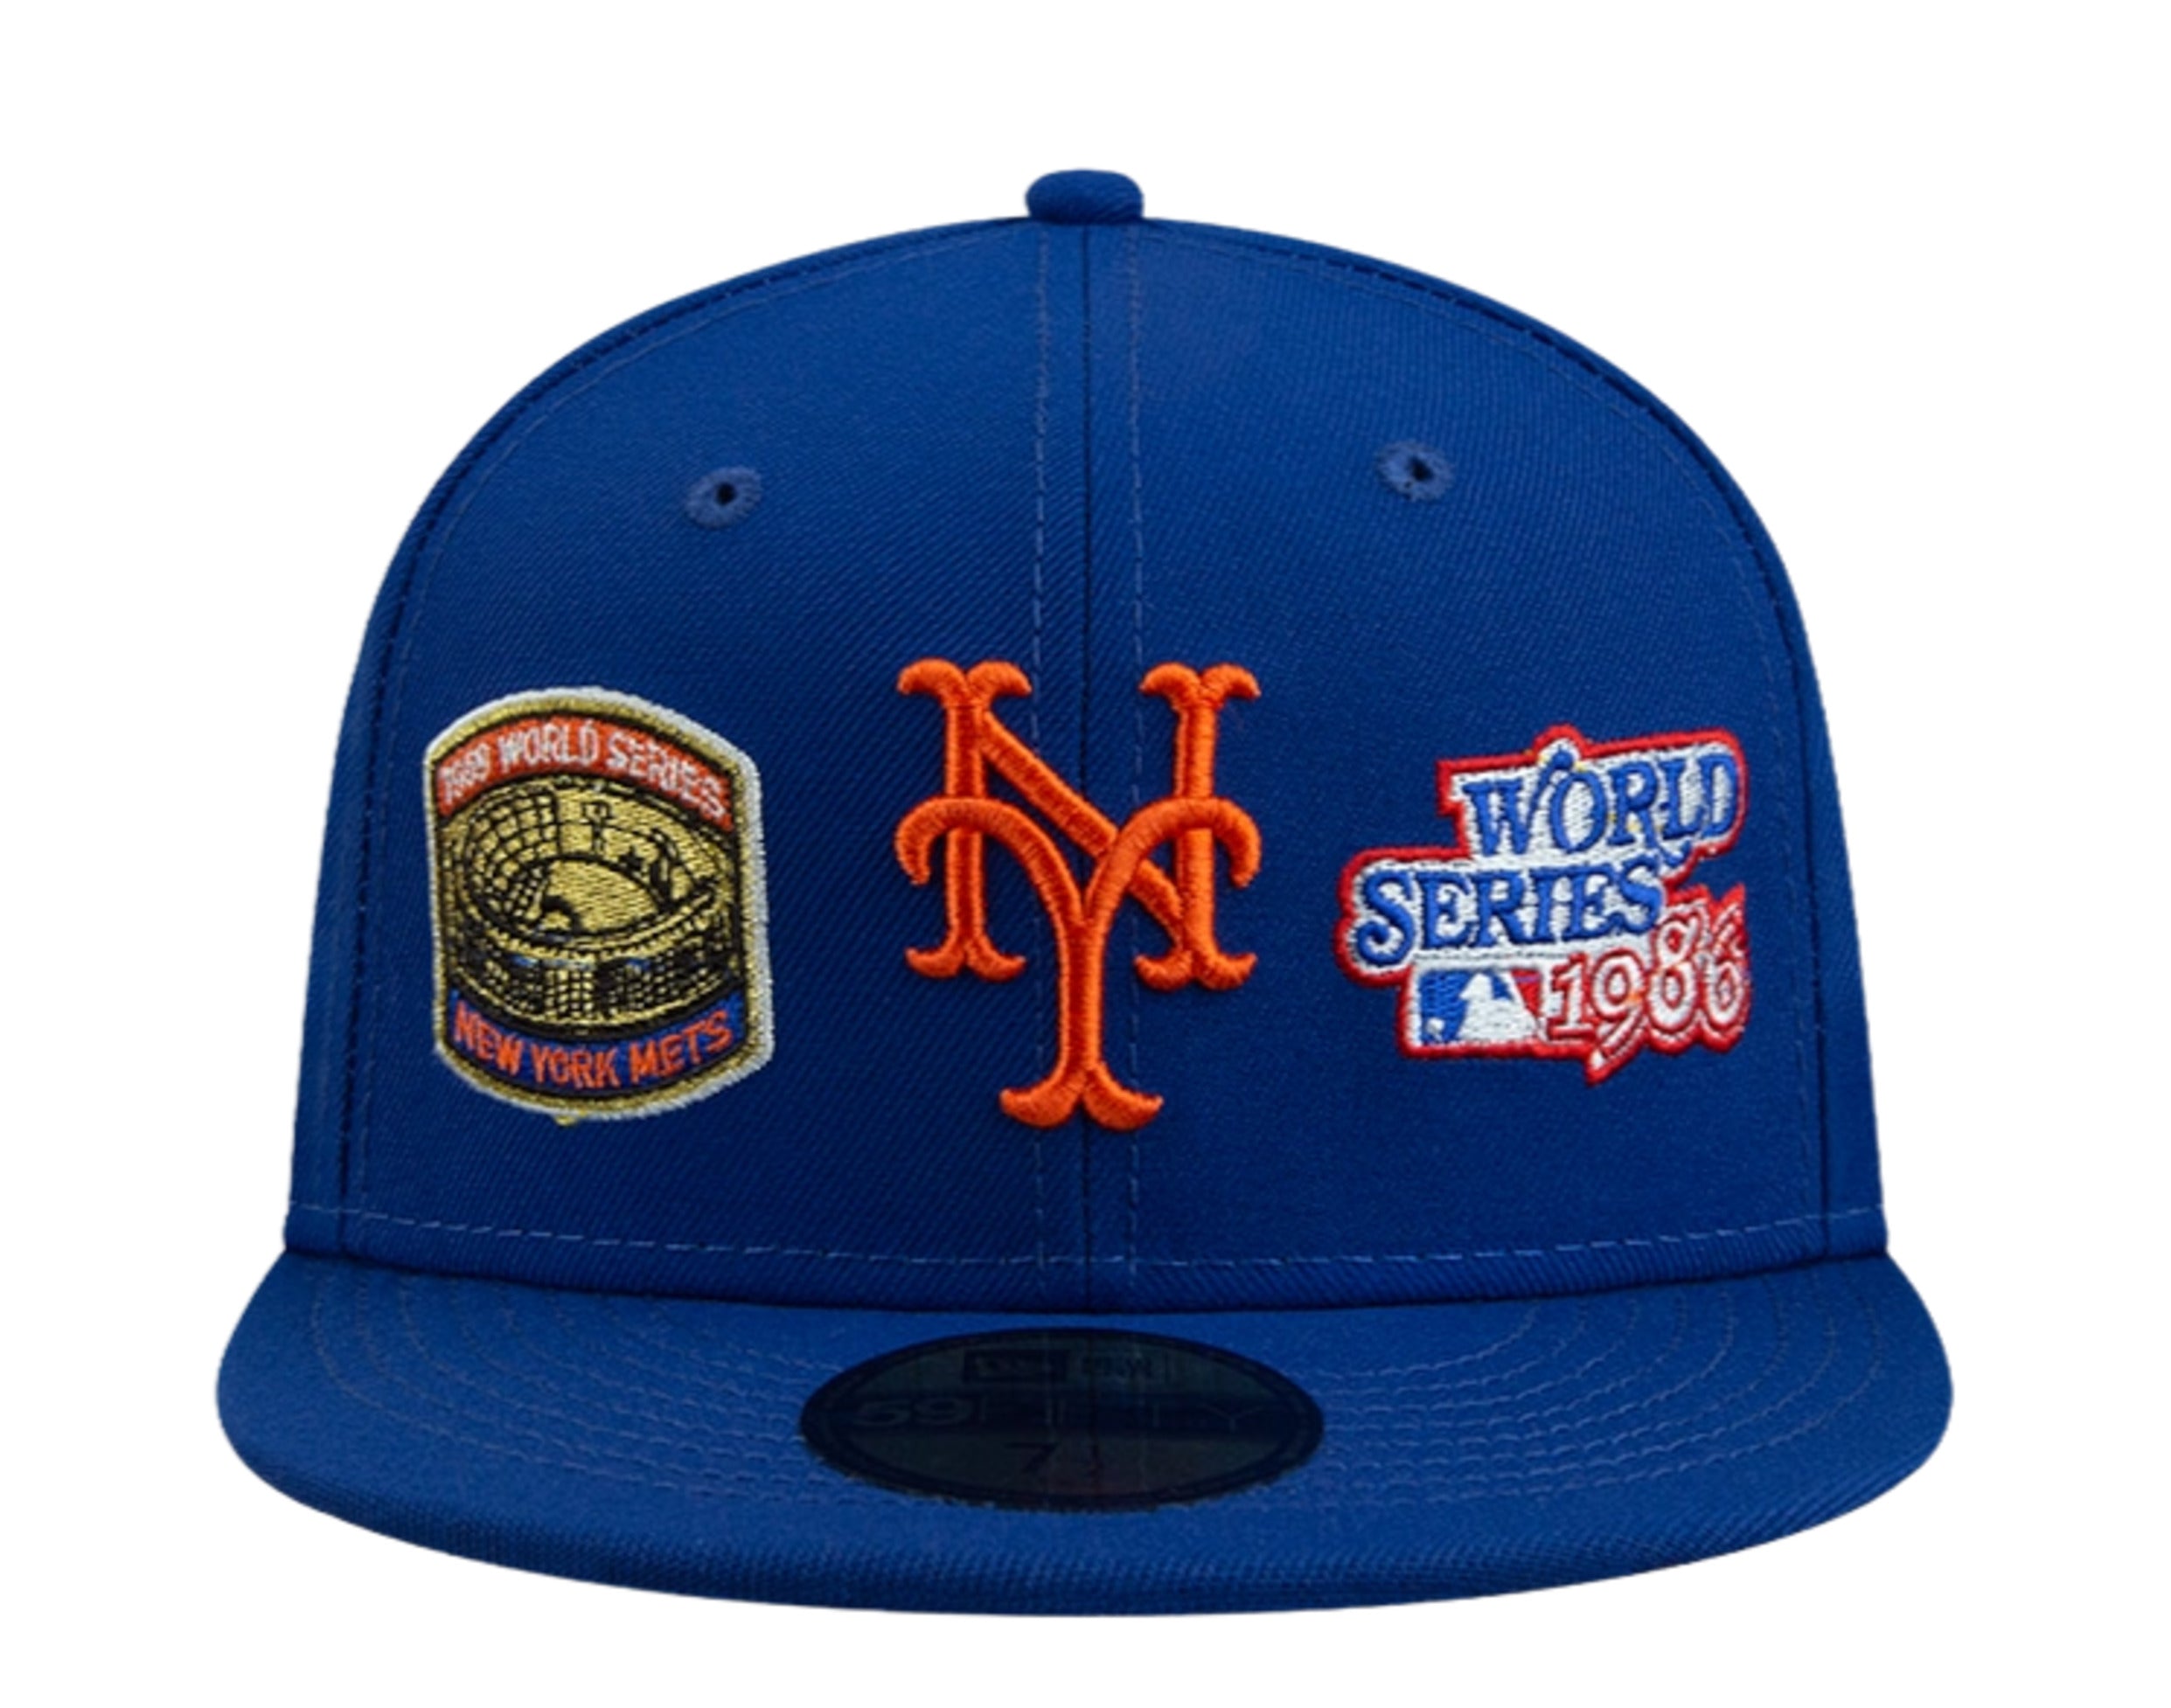 New York Mets HISTORIC CHAMPIONS Royal Fitted Hat by New Era